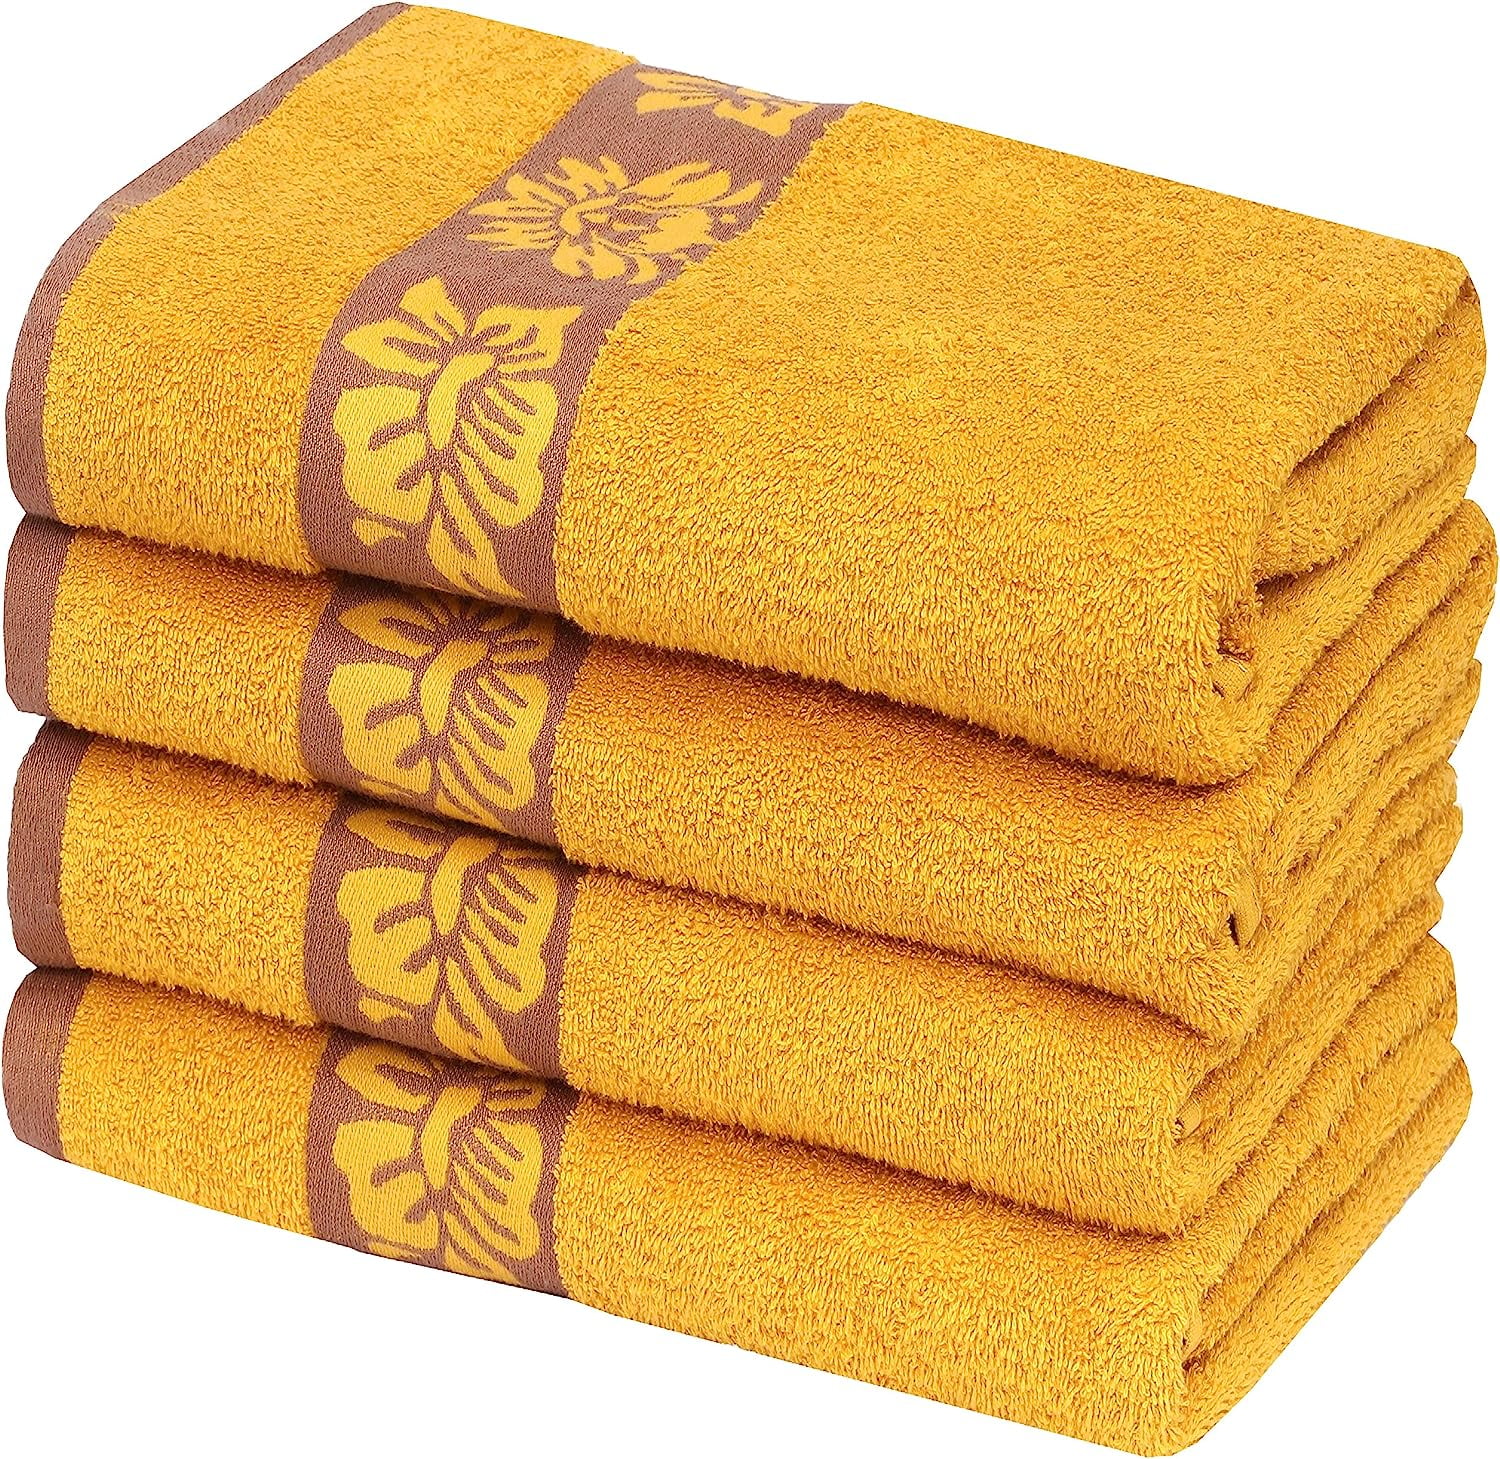  RUVANTI Bath Towels 4 Pcs (27x54 Inch, Cream) 100% Cotton Extra  Large Bathroom Towel Set. Super Soft, Highly Absorbent, Quick Dry,  Lightweight & Washable Luxury Towels for Bathroom, Home, Spa, Hotel. 